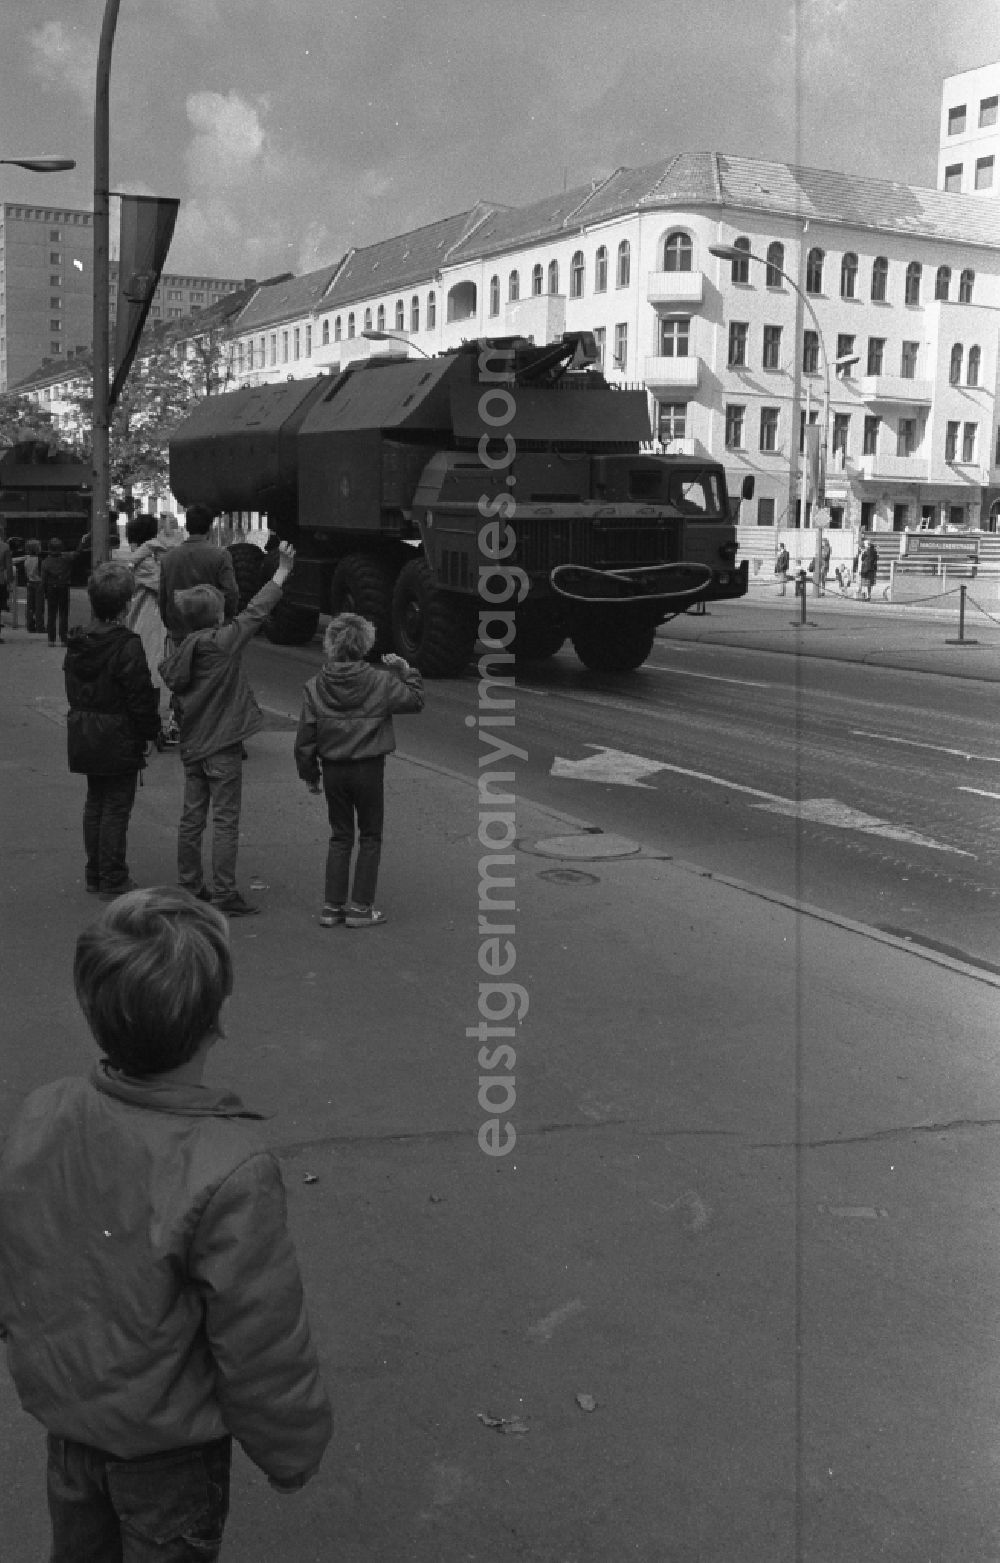 GDR photo archive: Berlin - Parade ride of military and combat technology of the FLA rocket troops of the NVA National People's Army for the national holiday on Karl-Marx-Allee in the district of Friedrichshain in Berlin East Berlin on the territory of the former GDR, German Democratic Republic